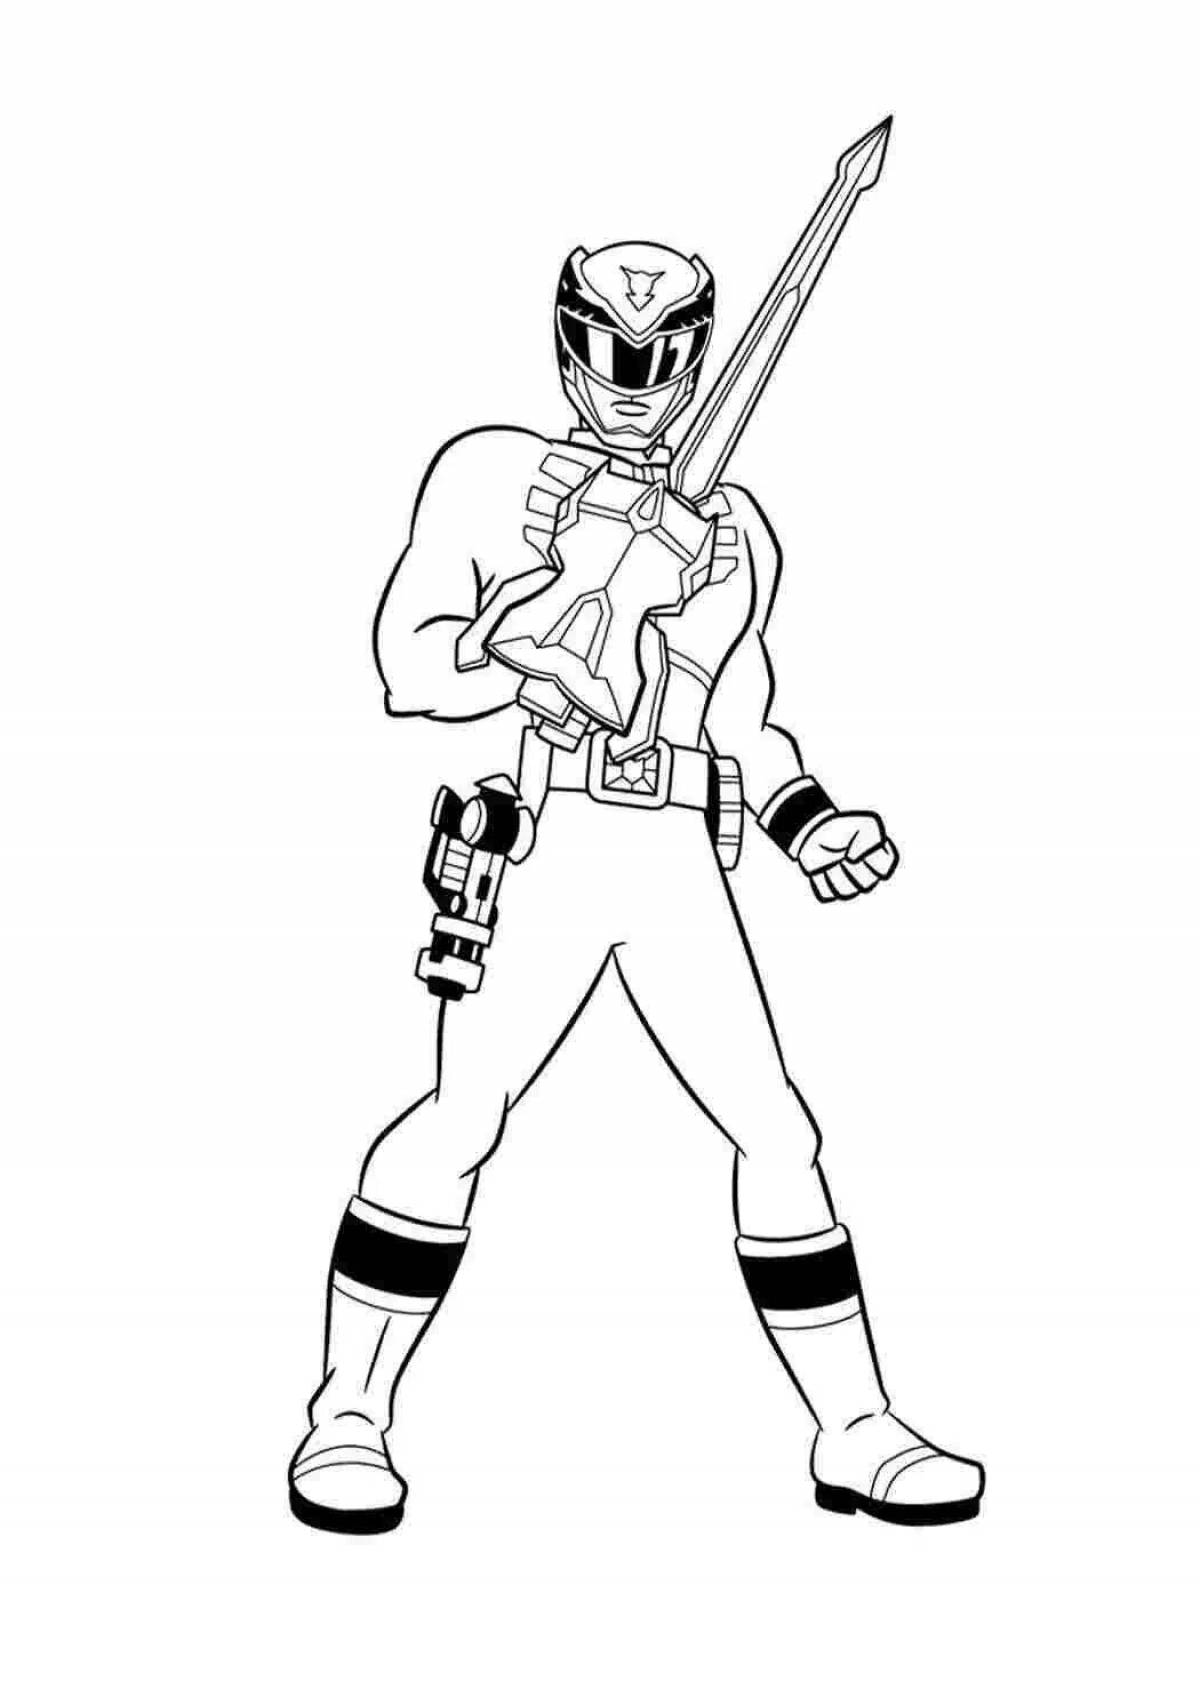 Great roger ranger coloring page